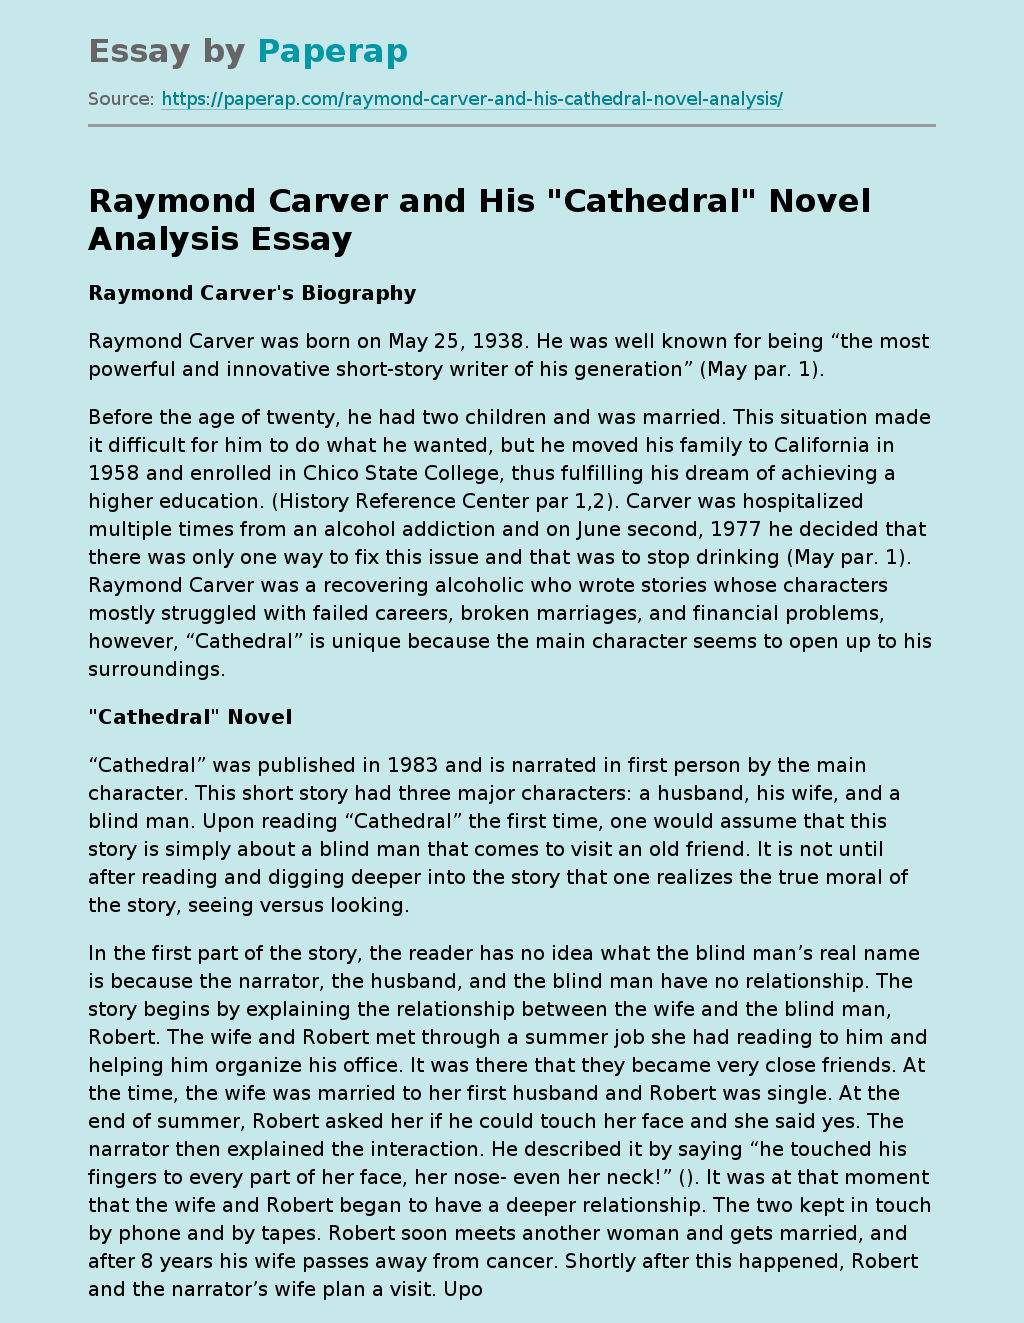 Raymond Carver and His "Cathedral" Novel Analysis